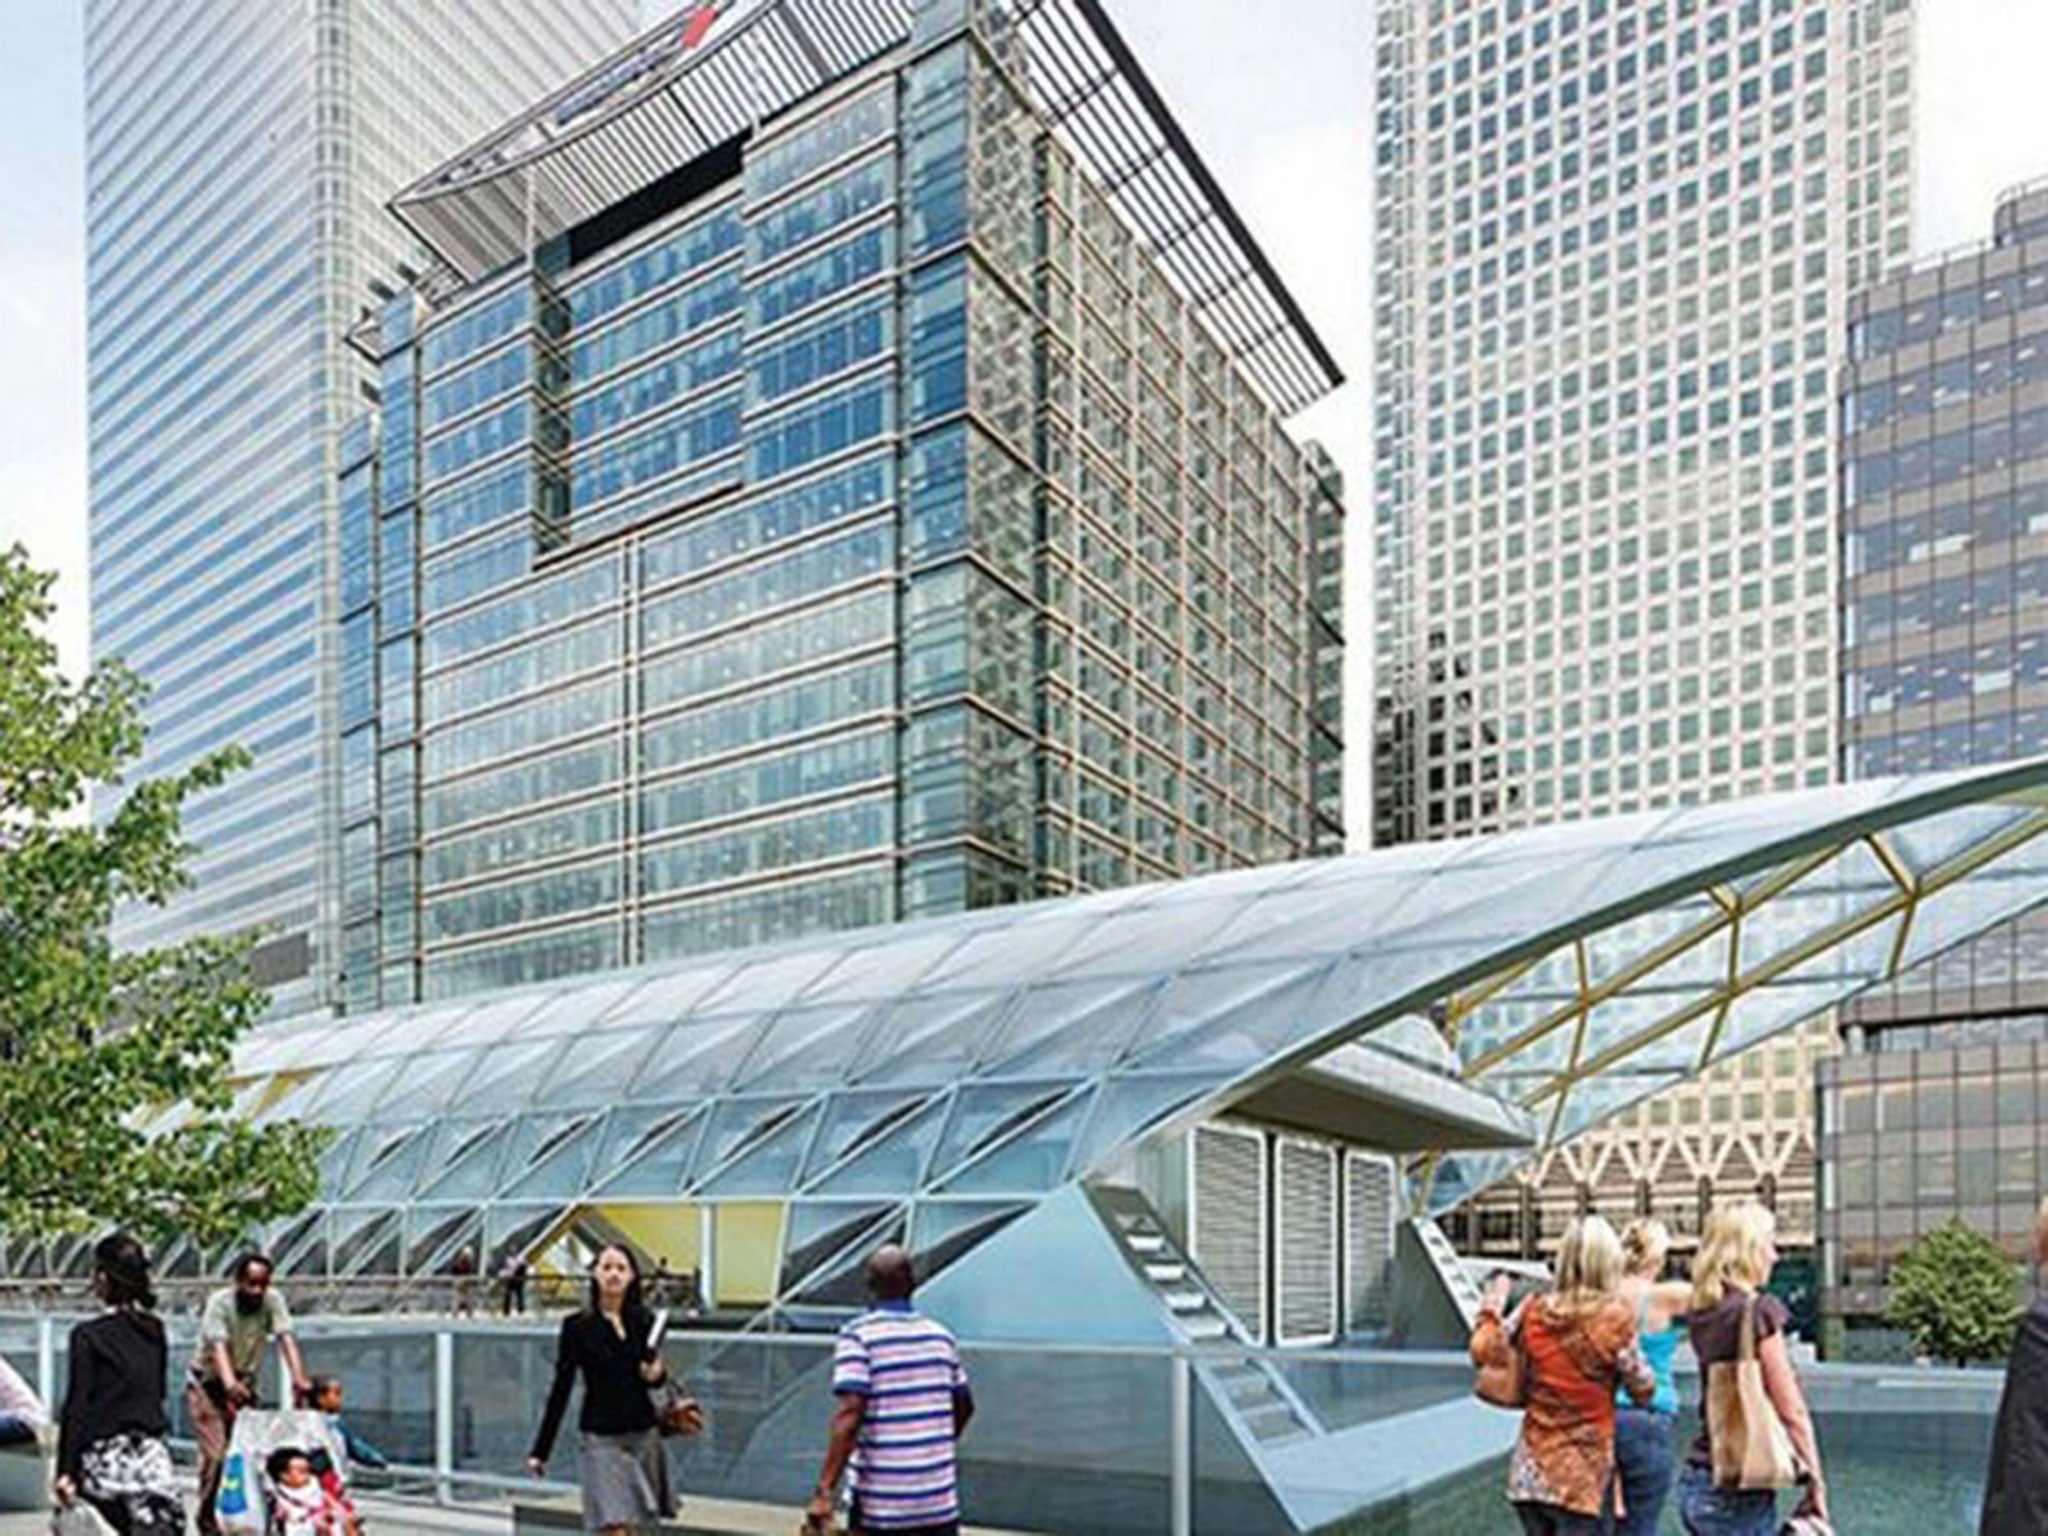 An architect's impression of how Crossrail Canary Wharf Station in London may look